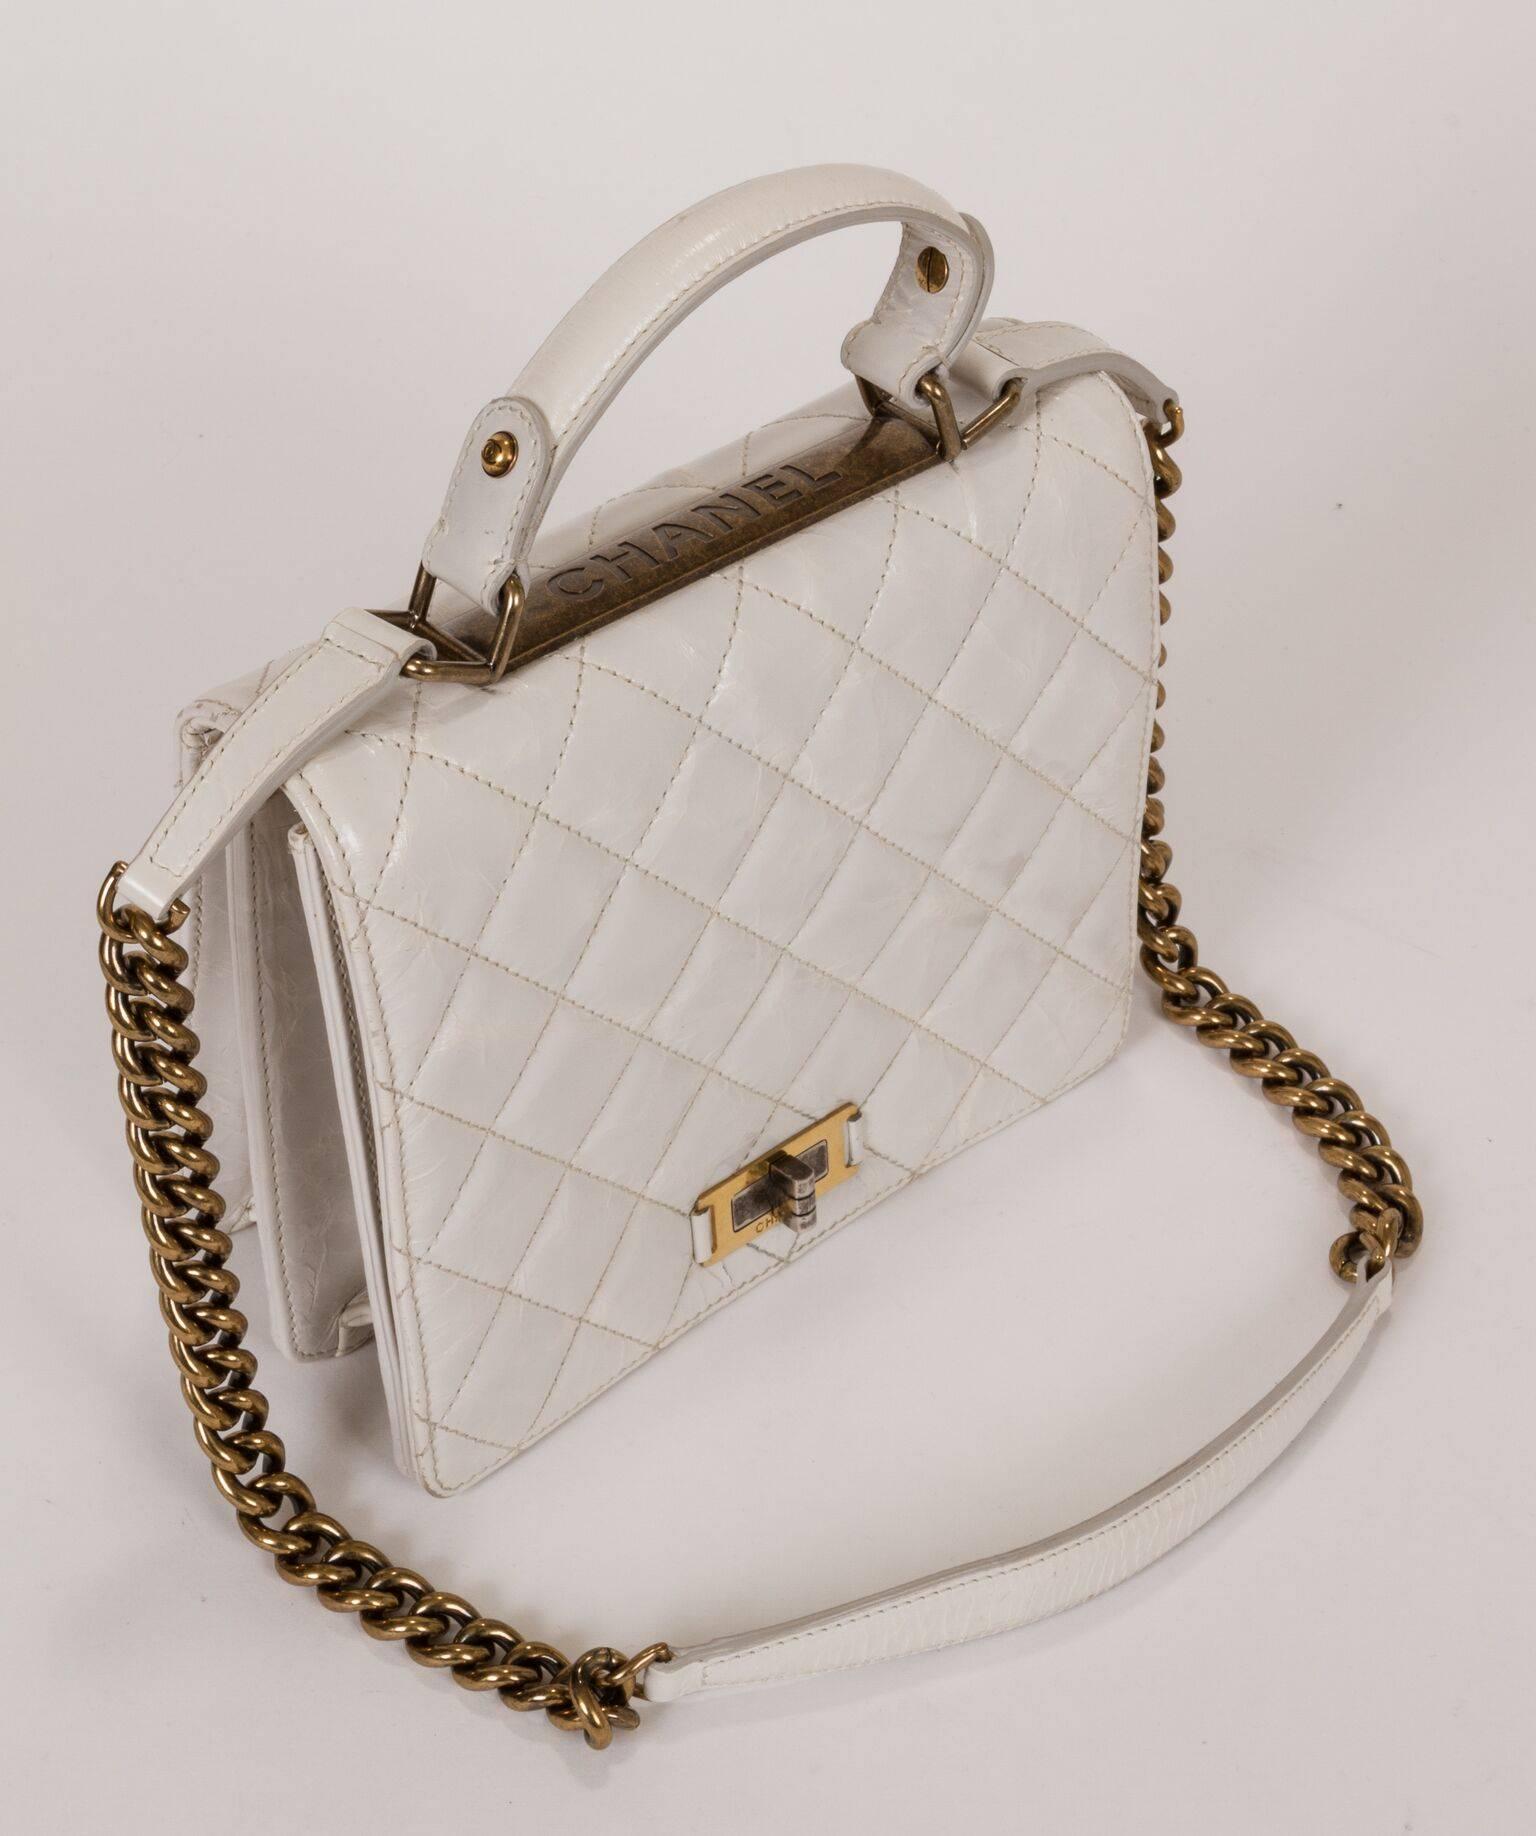 Gray Chanel White Distressed Leather Boy Bag